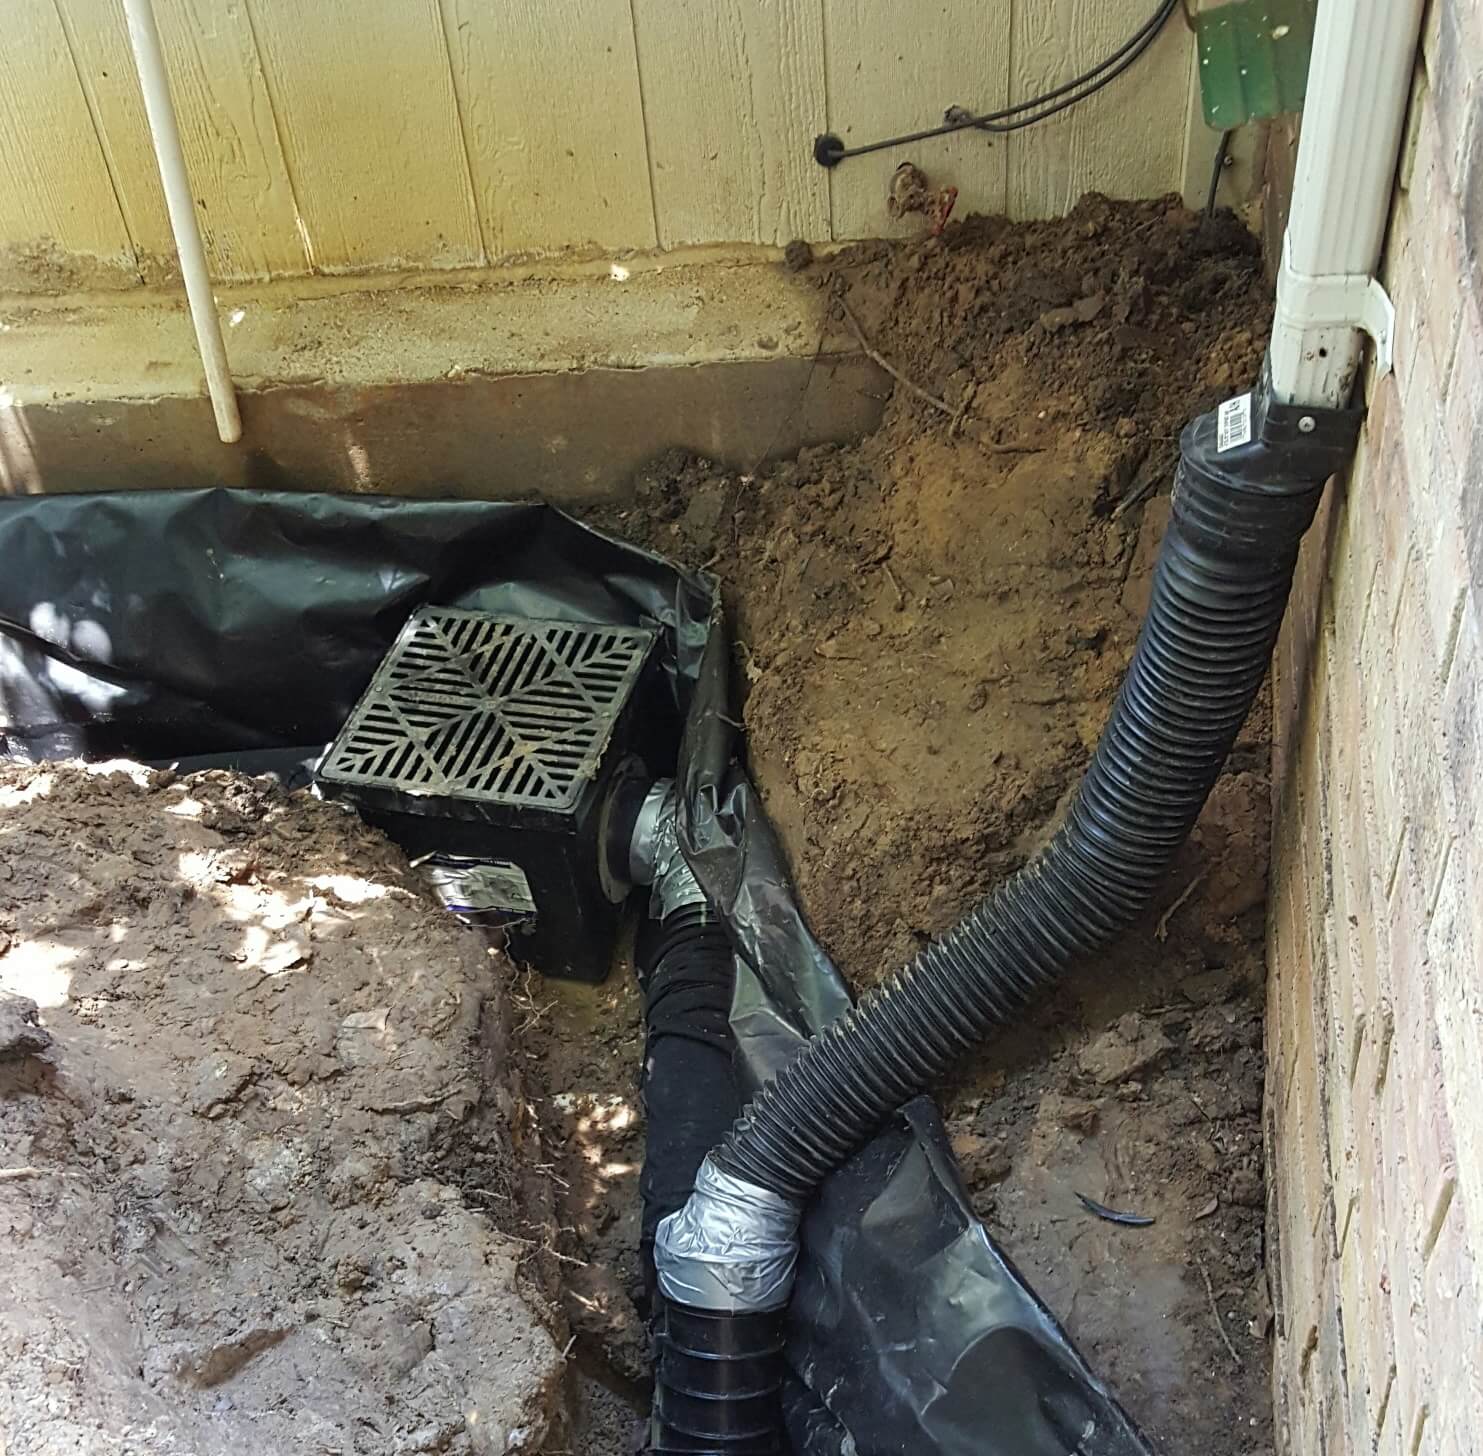 French drain